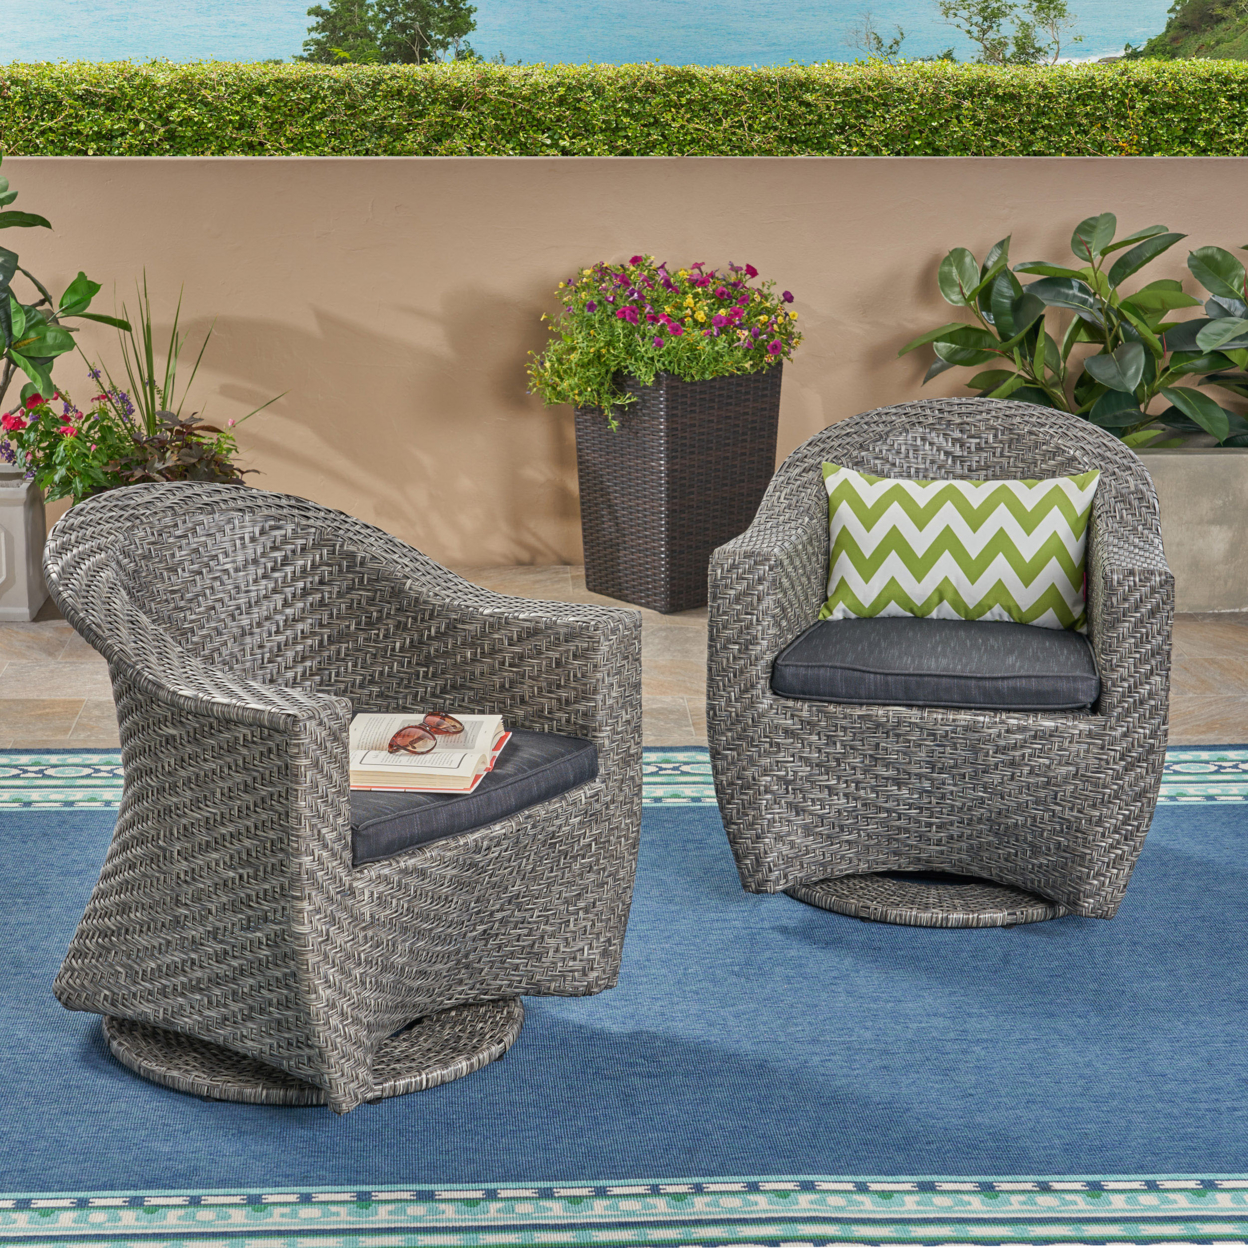 Larchmont Patio Swivel Chairs, Wicker With Outdoor Cushions, Mixed Black And Dark Gray - Default, Set Of 2